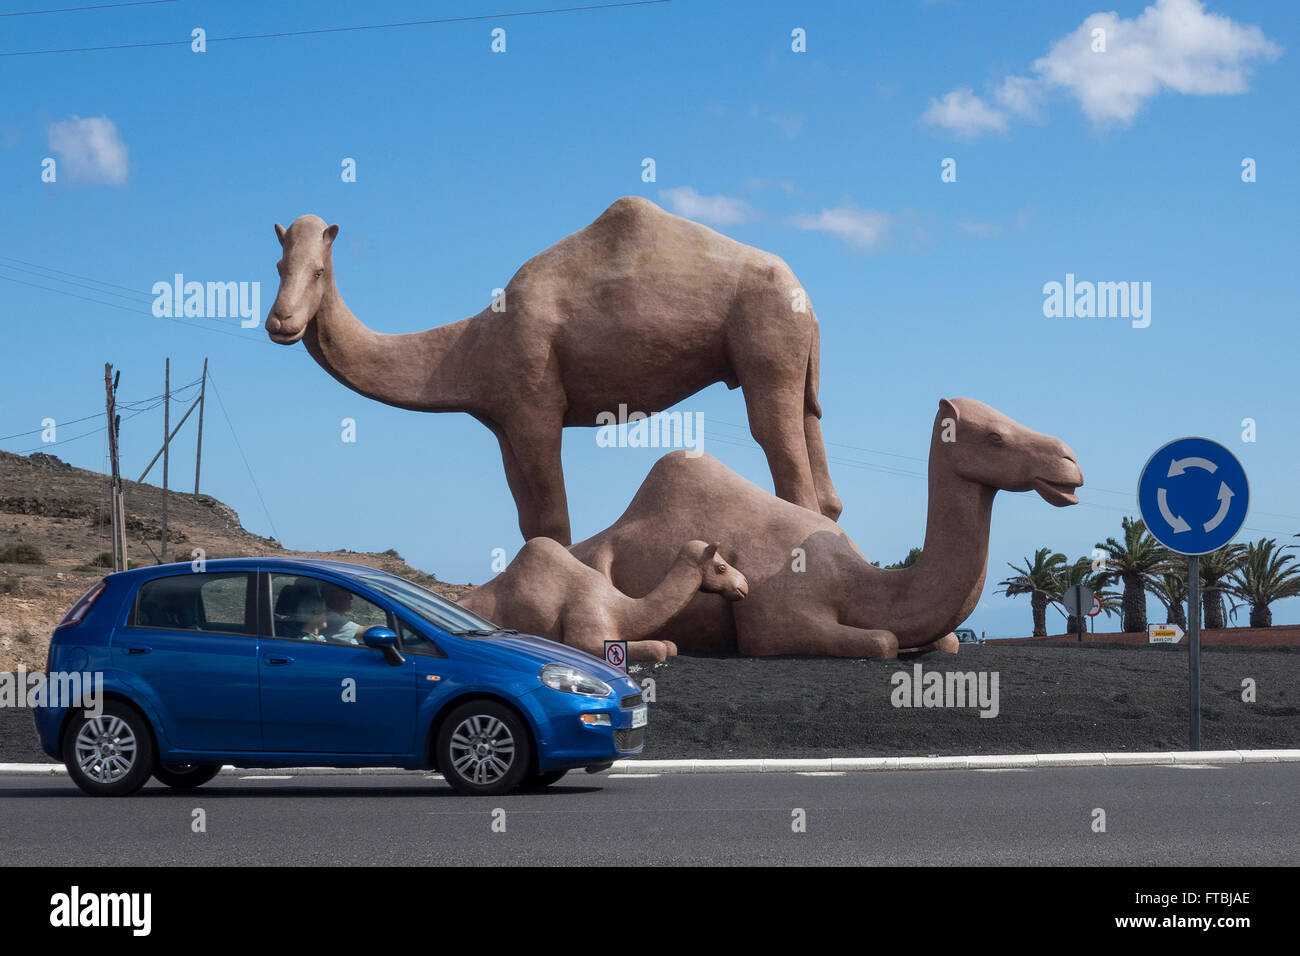 Spain, Canary islands, Lanzarote, Traffic roundabout with camel statues Stock Photo